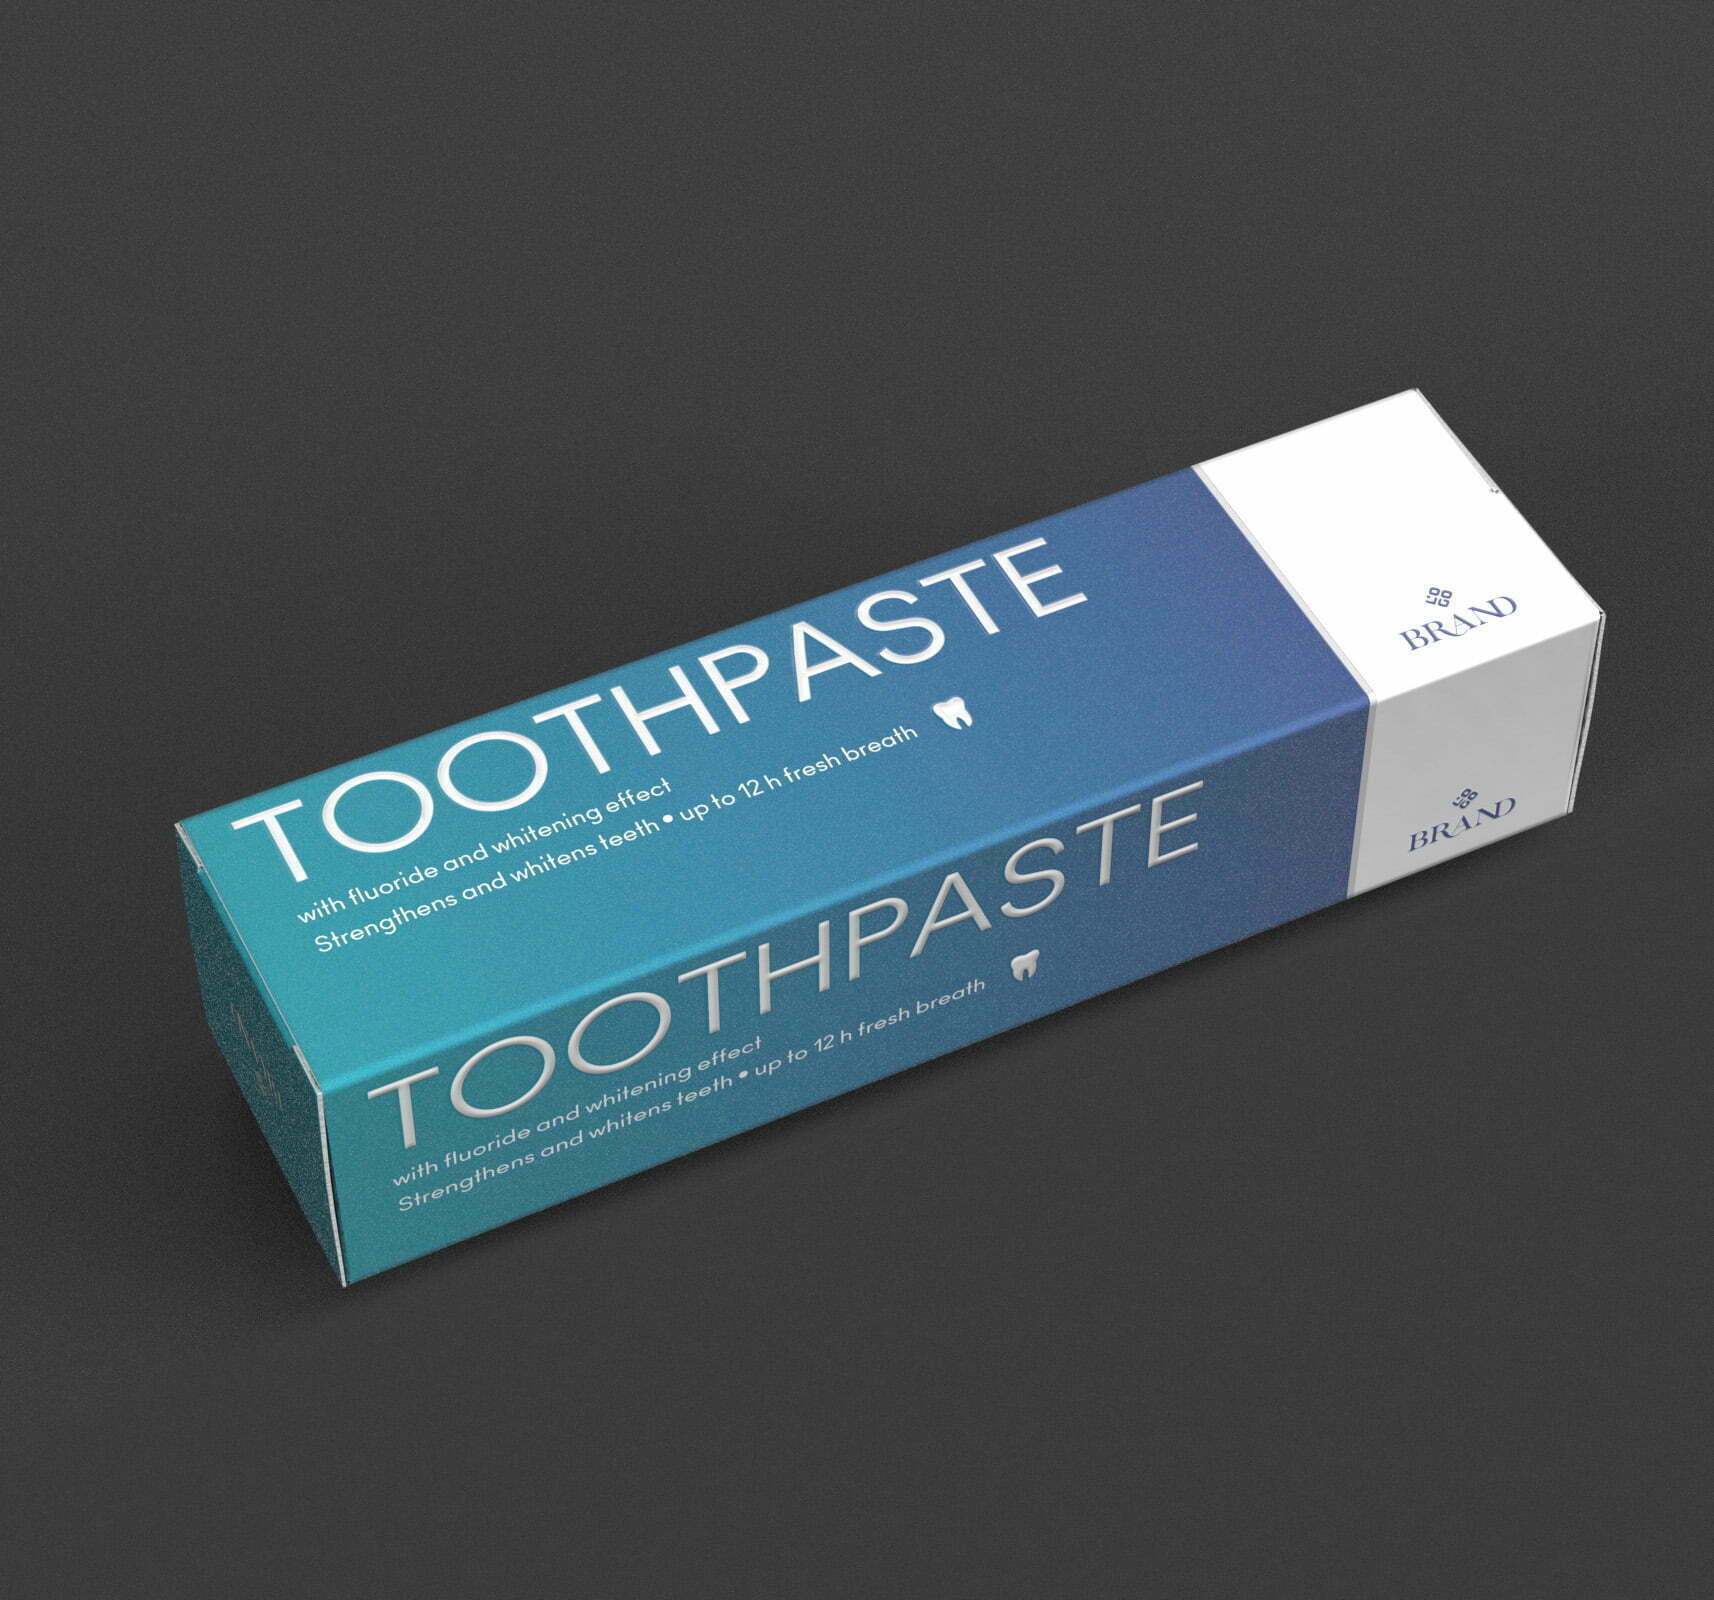 Toothpaste without CF